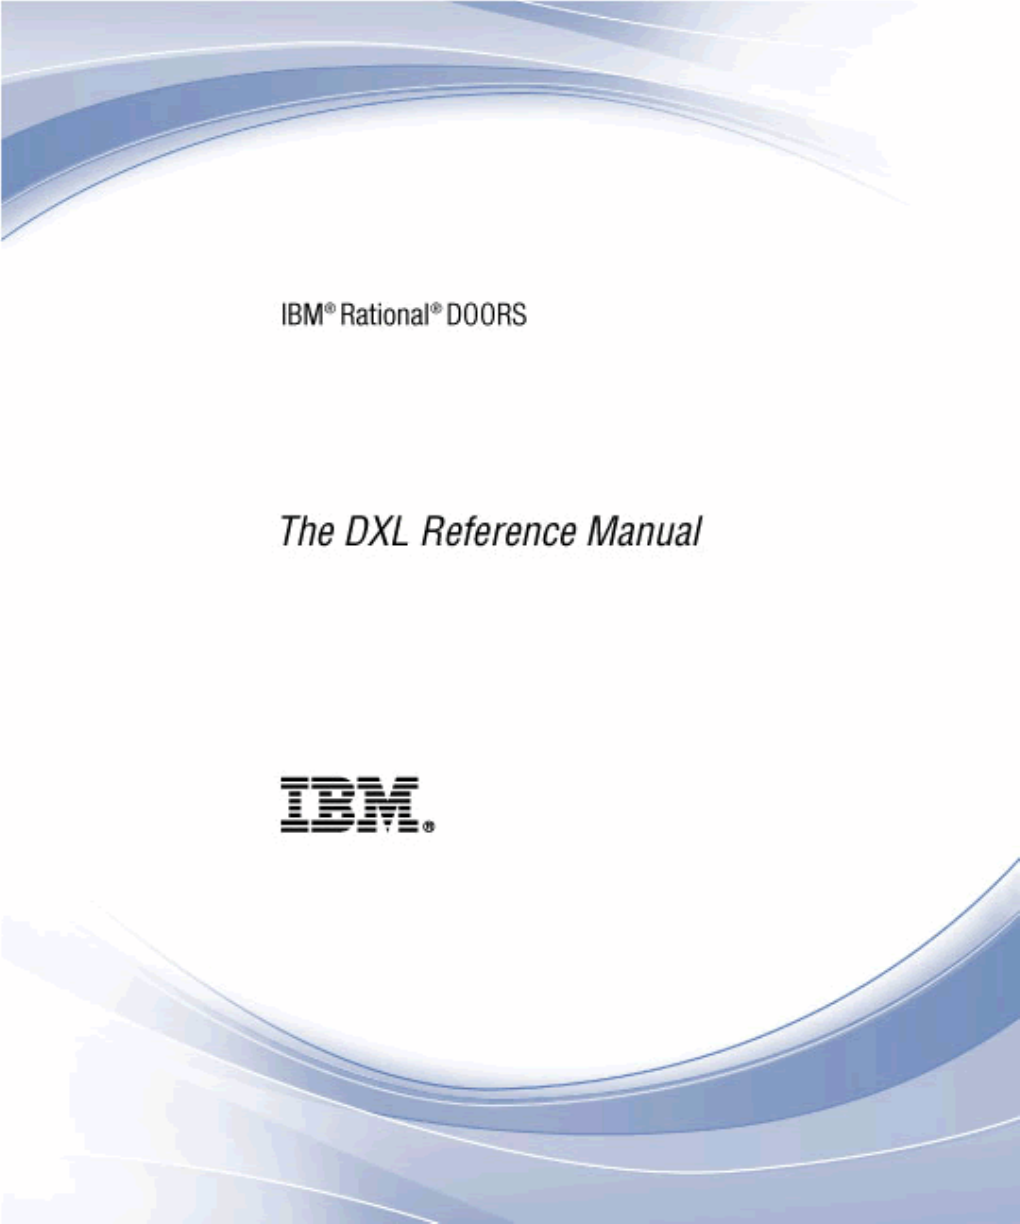 IBM Rational DOORS DXL Reference Manual Release 9.5 Before Using This Information, Be Sure to Read the General Information Under the "Notices" Chapter on Page 915